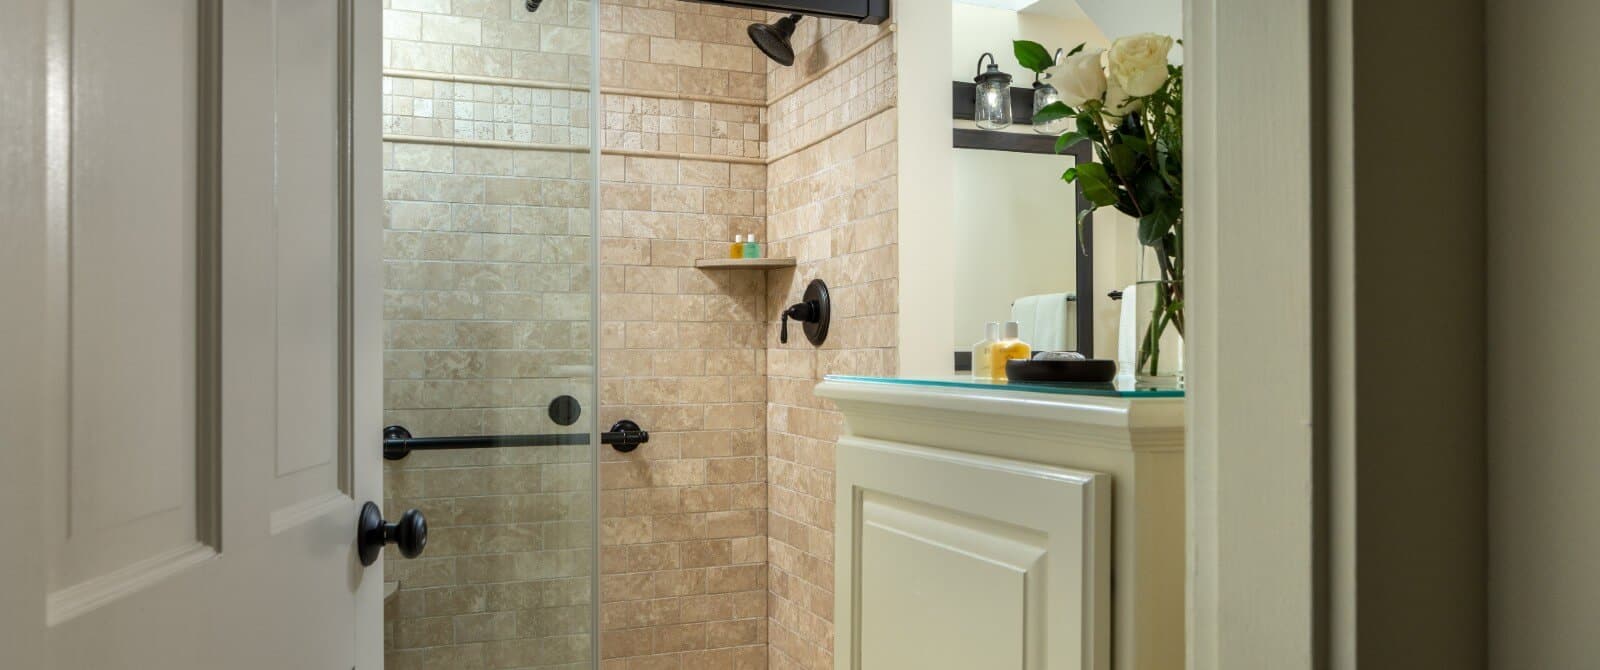 Open door to bathroom with tiled shower with glass doors and cabinet with vase of flowers